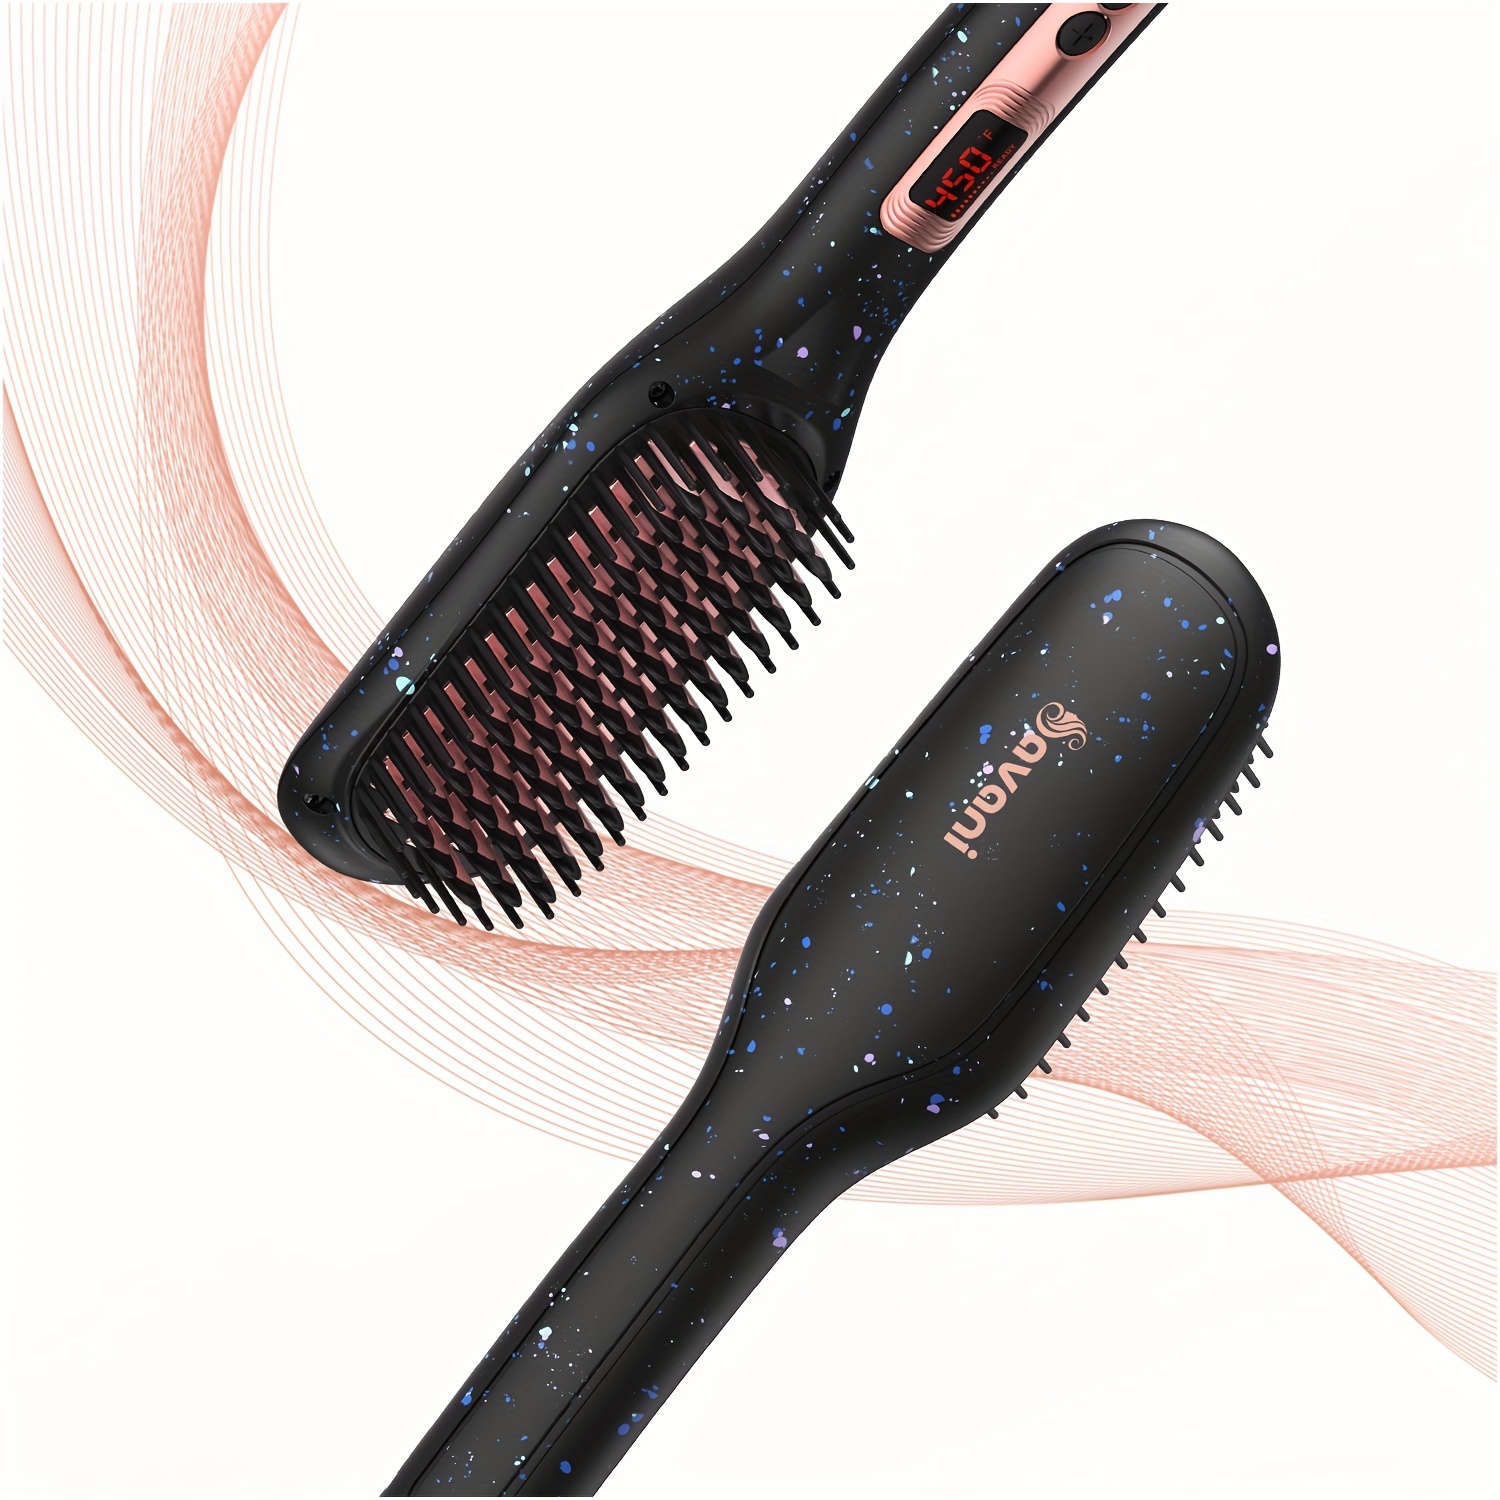 savani hair straightener brush fast heating ceramic negative ion hair straightening comb electric hot hair brush curly thick hair styling tool auto off anti scald multiple temp settings details 1